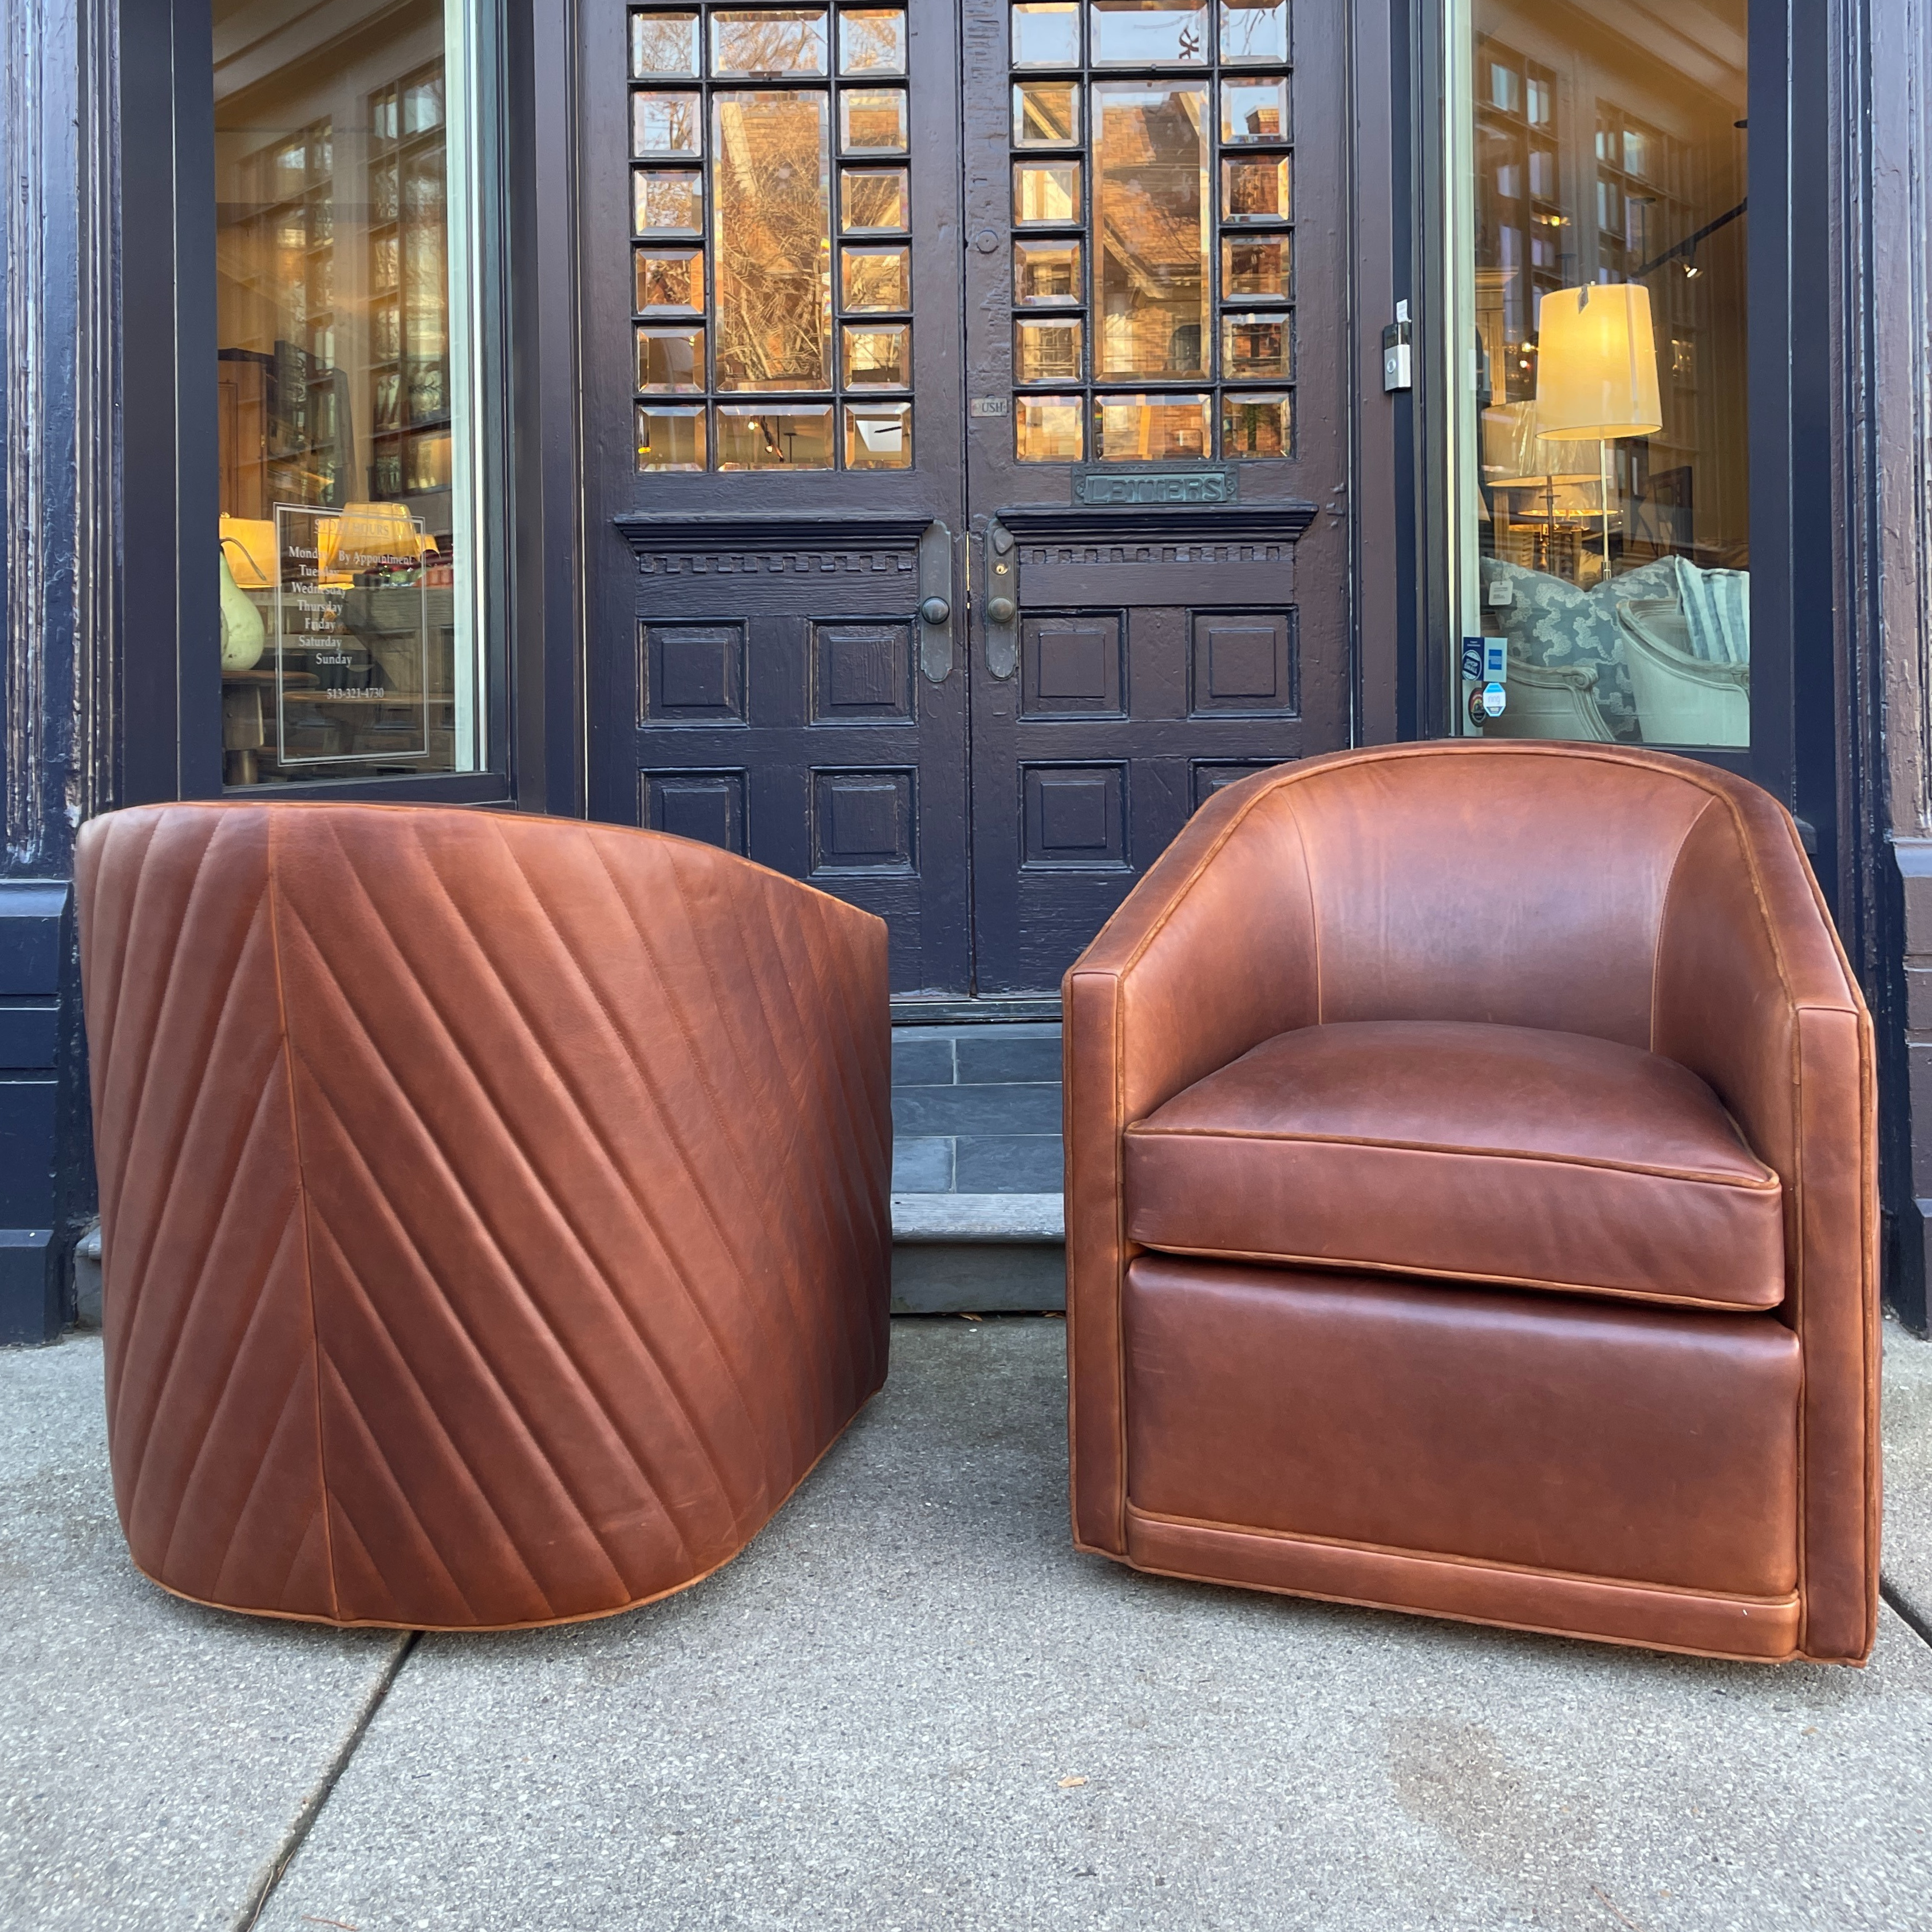 Radcliffe Leather Swivel Chair w/ Chevron Welting